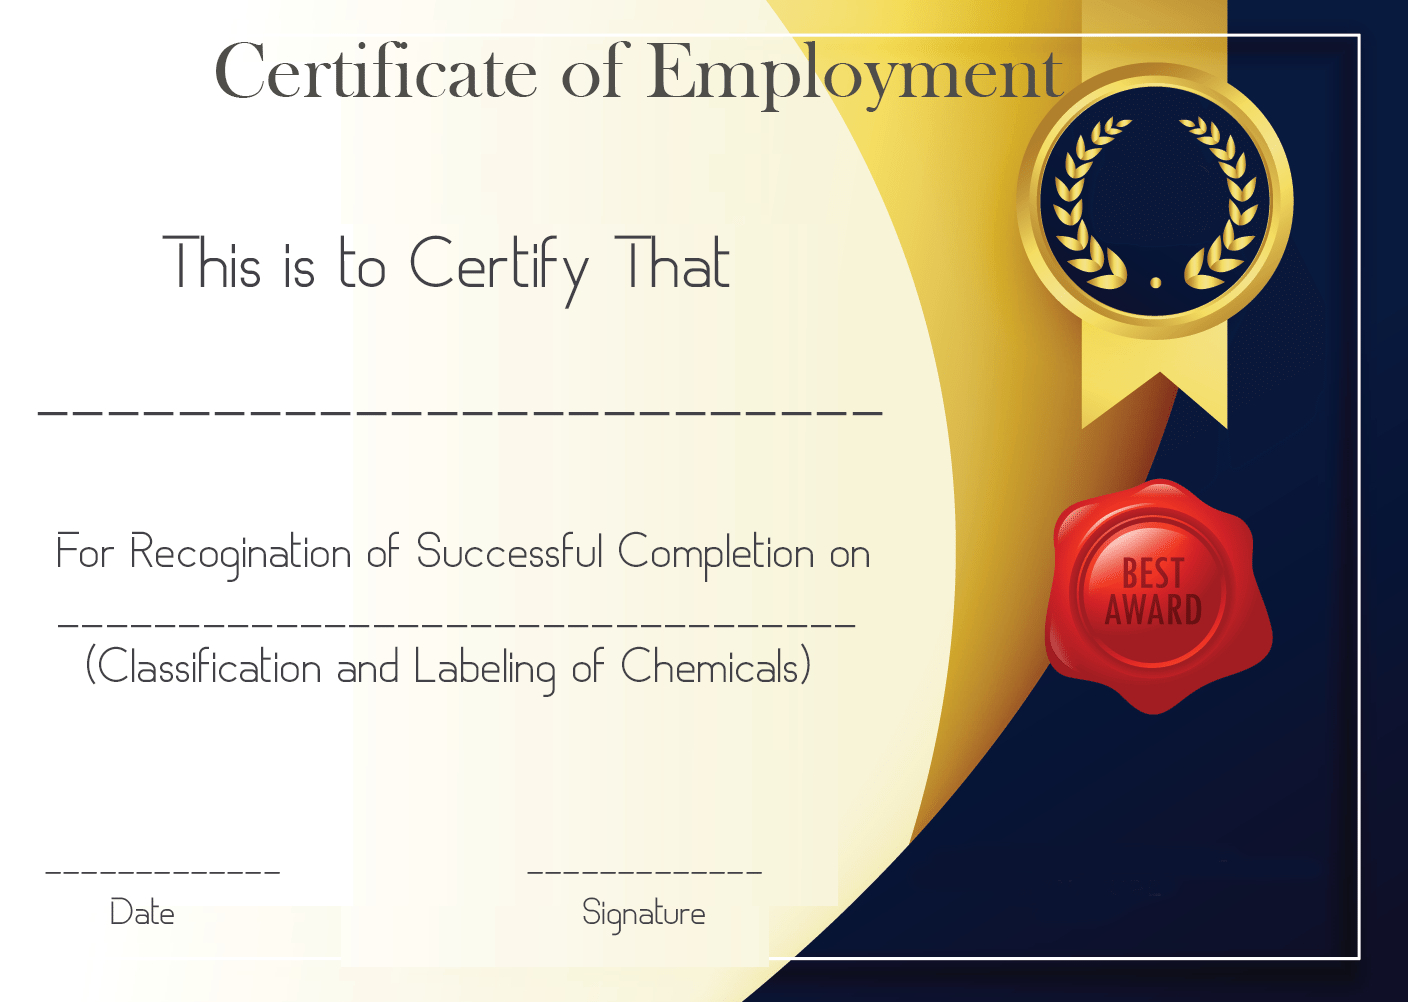 Free Sample Certificate Of Employment Template | Certificate Throughout Certificate Of Employment Template